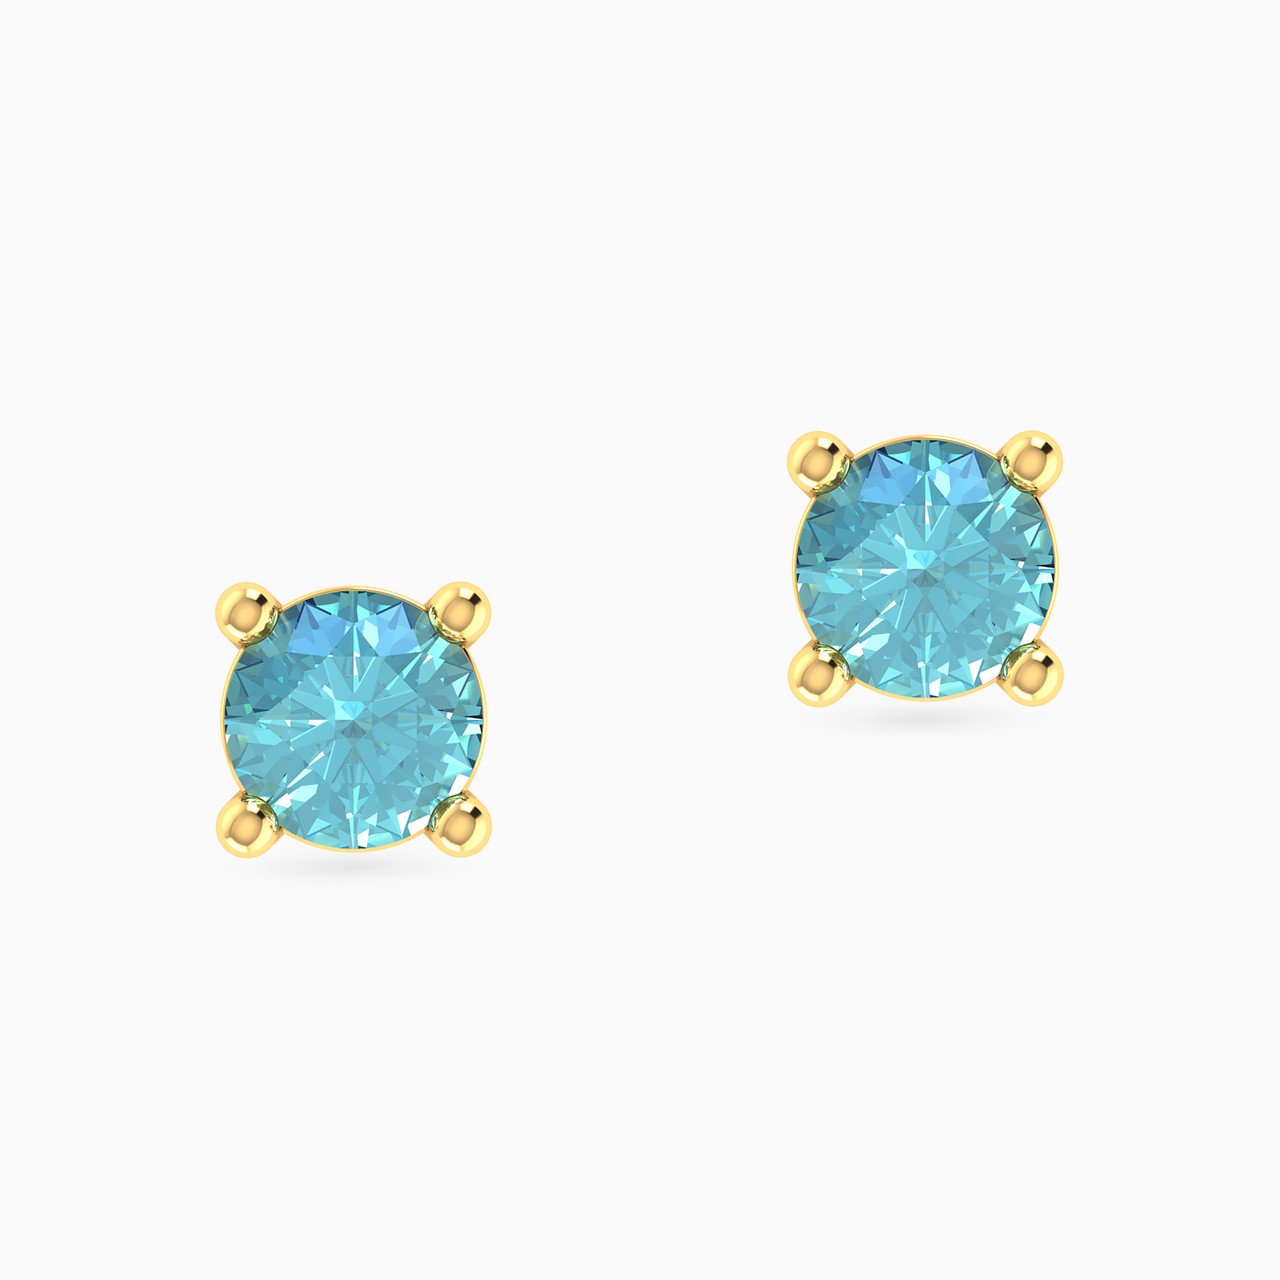 Circle Shaped Colored Stones Stud Earrings in 18K Gold